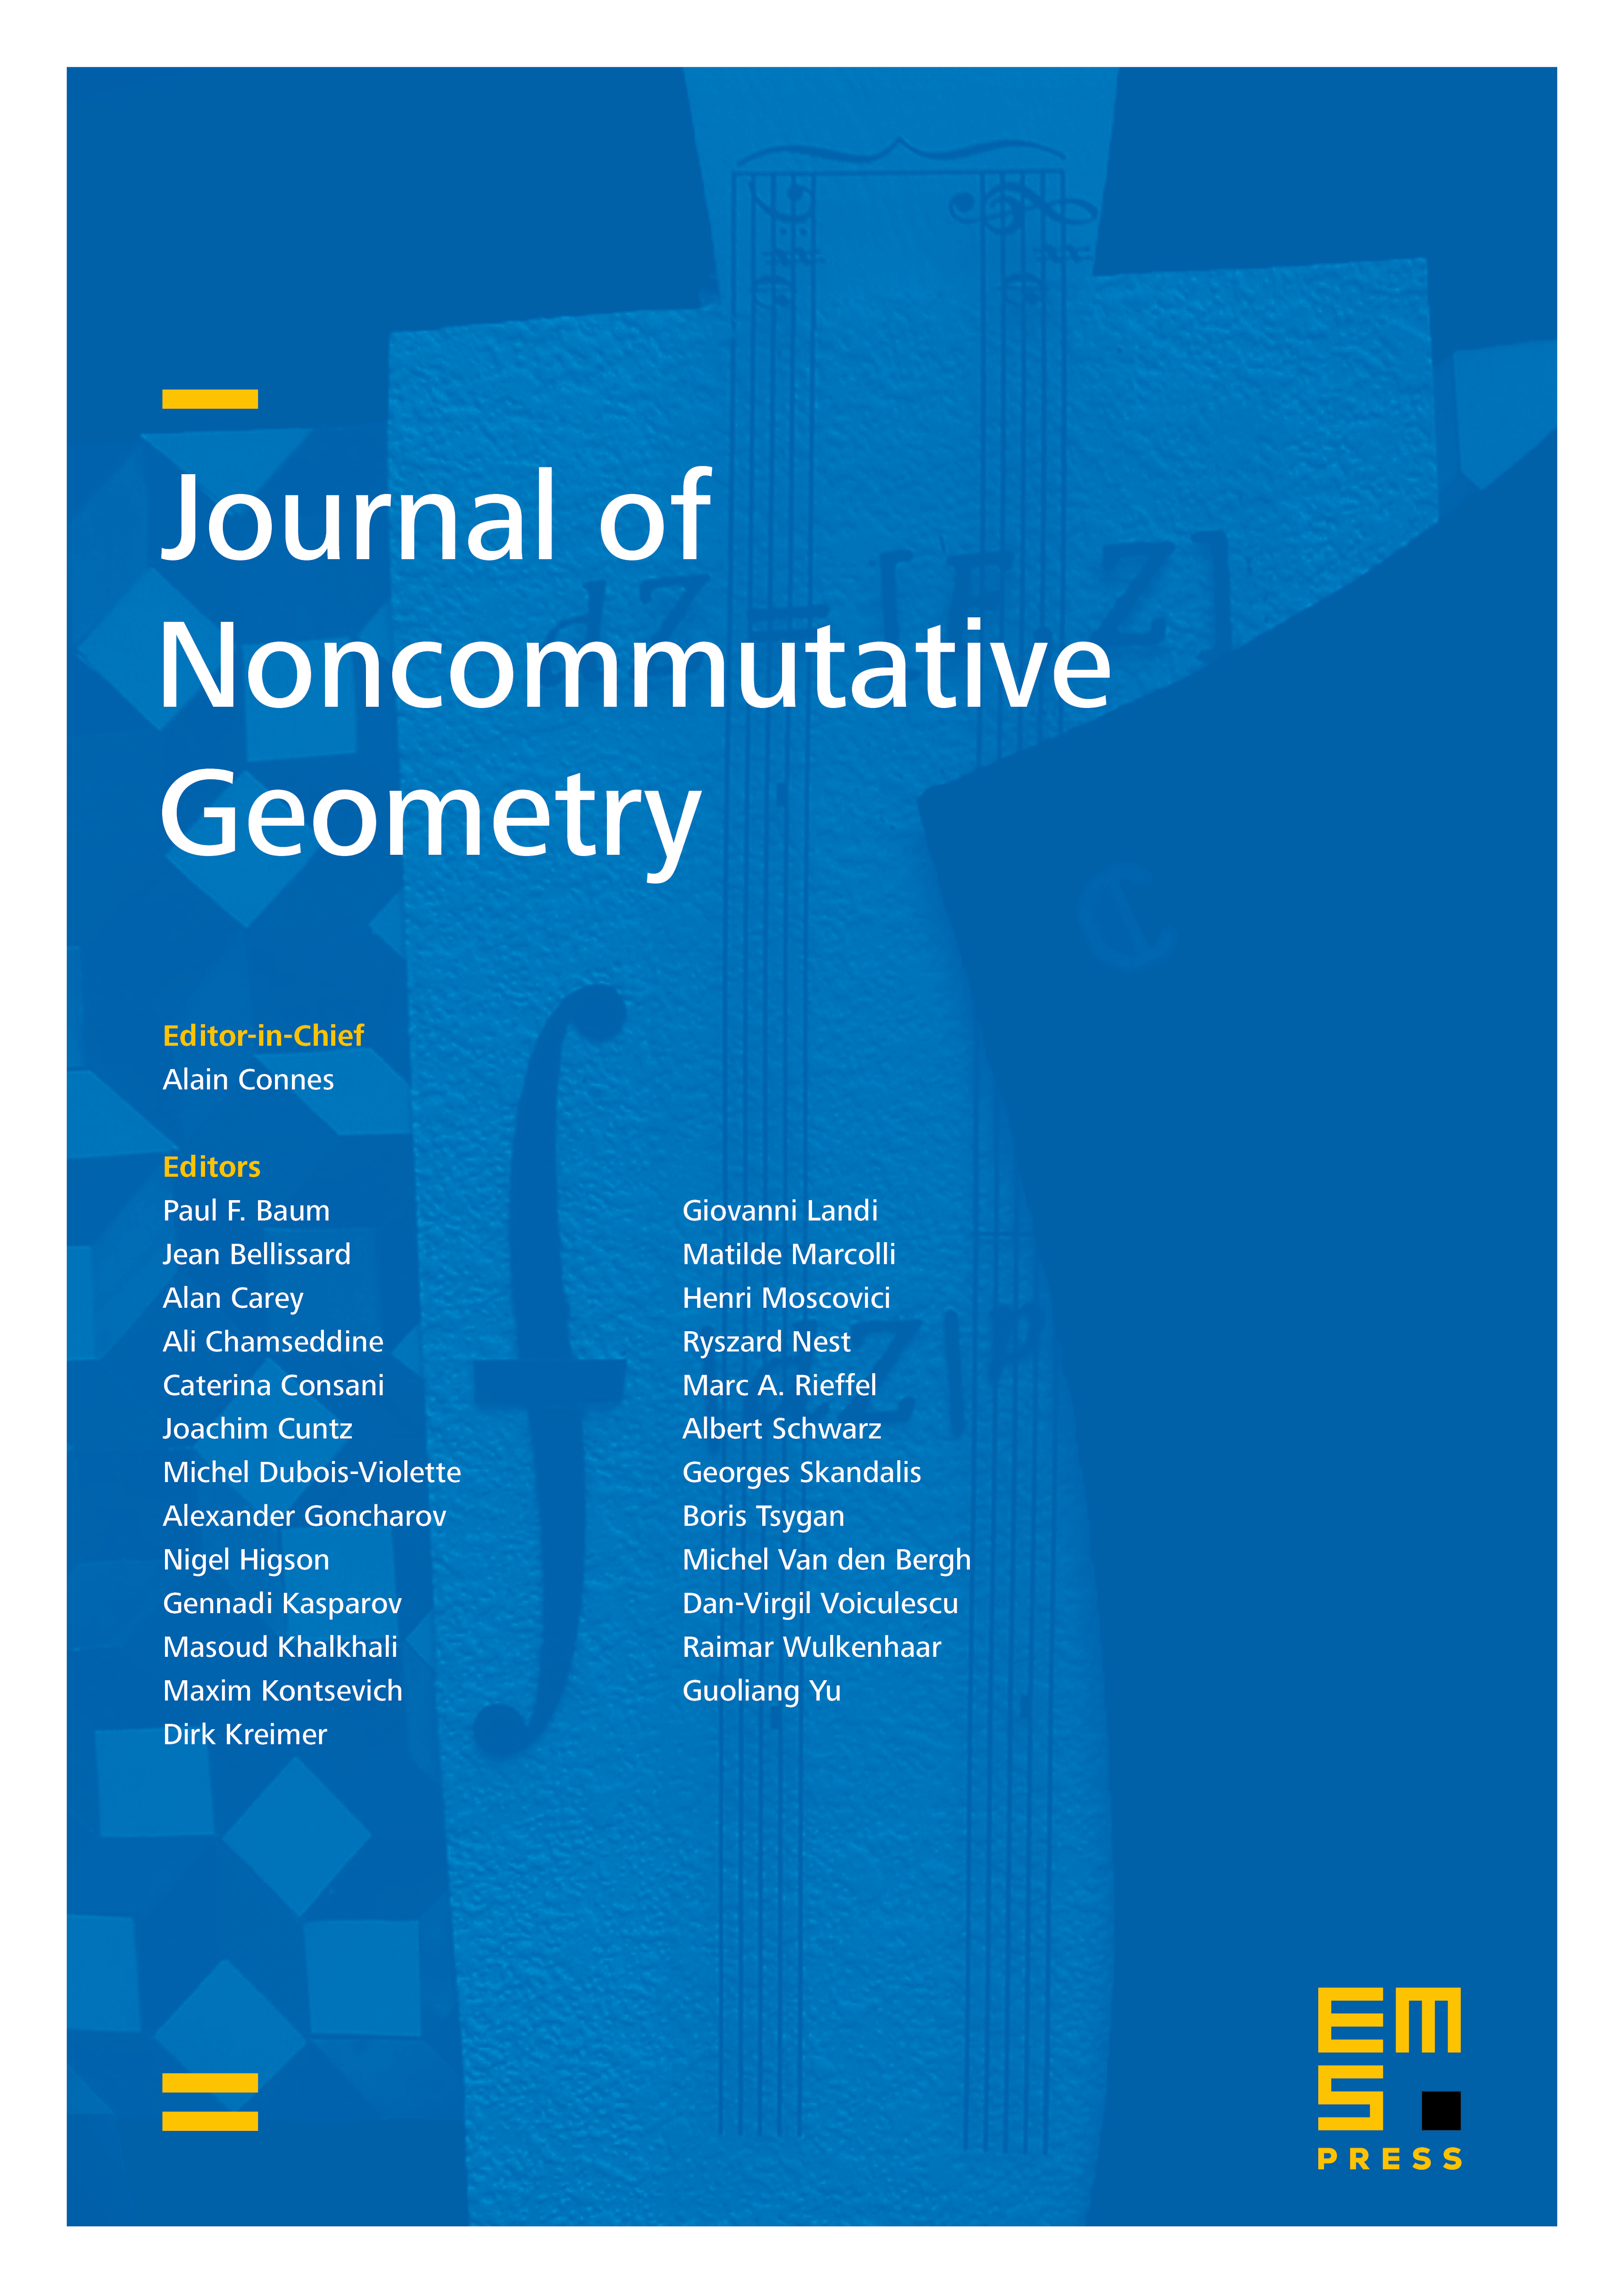 Non-commutative crepant resolutions for some toric singularities. II cover